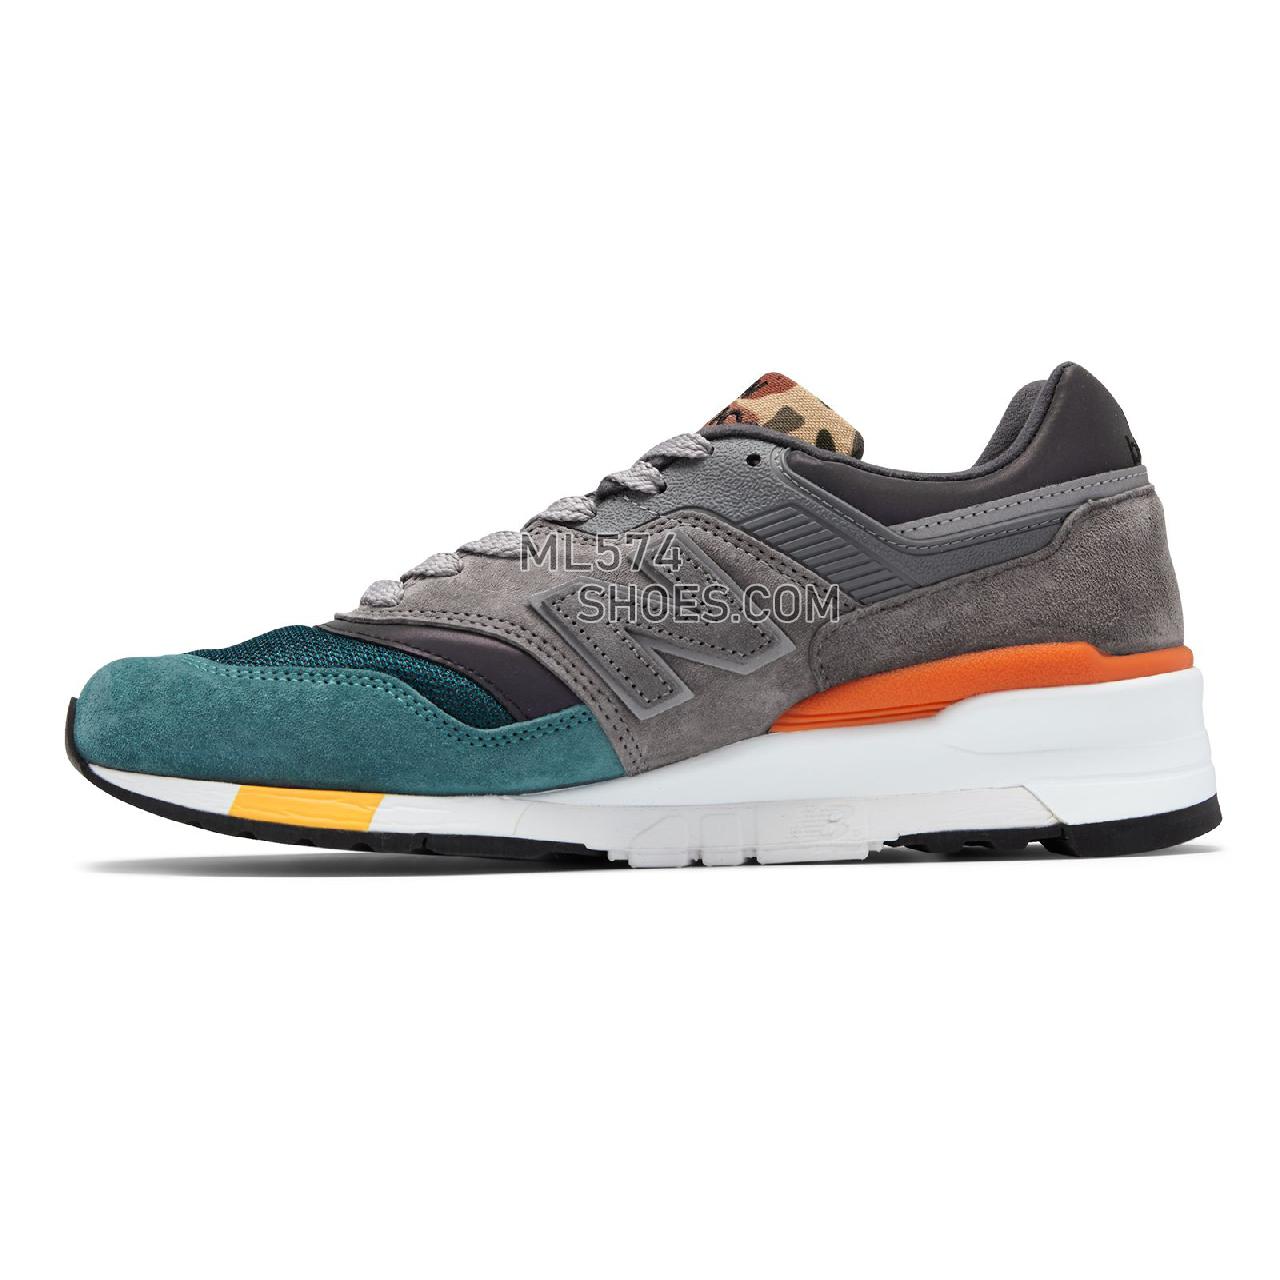 New Balance 997 Made in US - Men's 997 - Classic Grey with Teal - M997NM